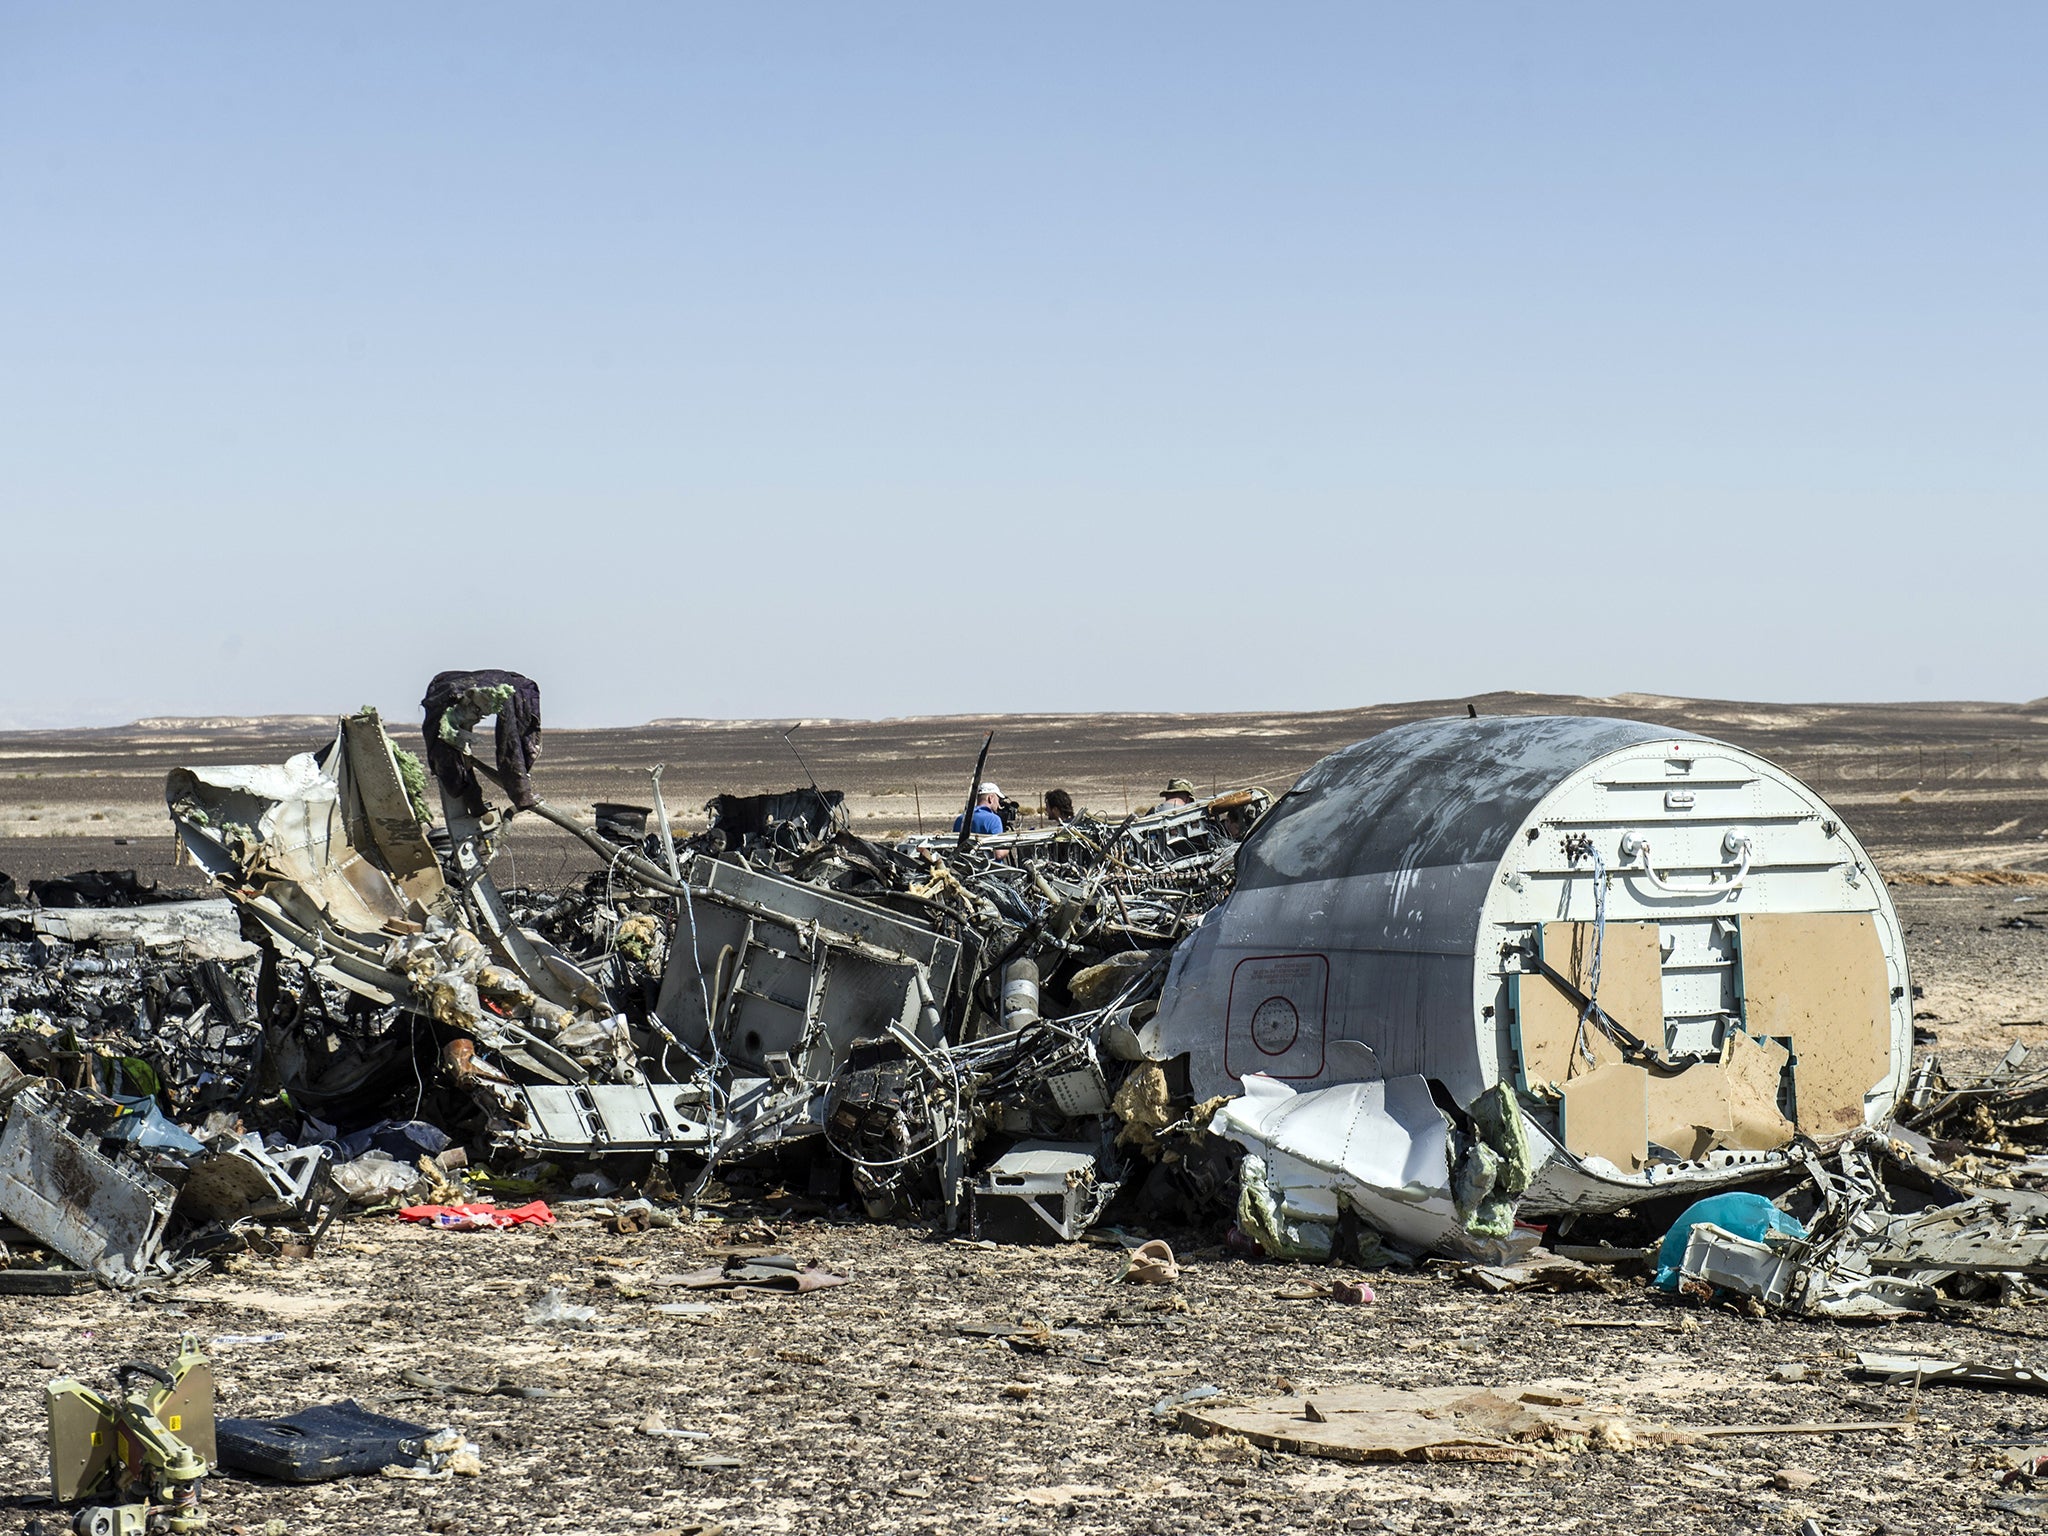 The Russian plane was attacked during a journey from Sharm el-Sheik to St Petersburg